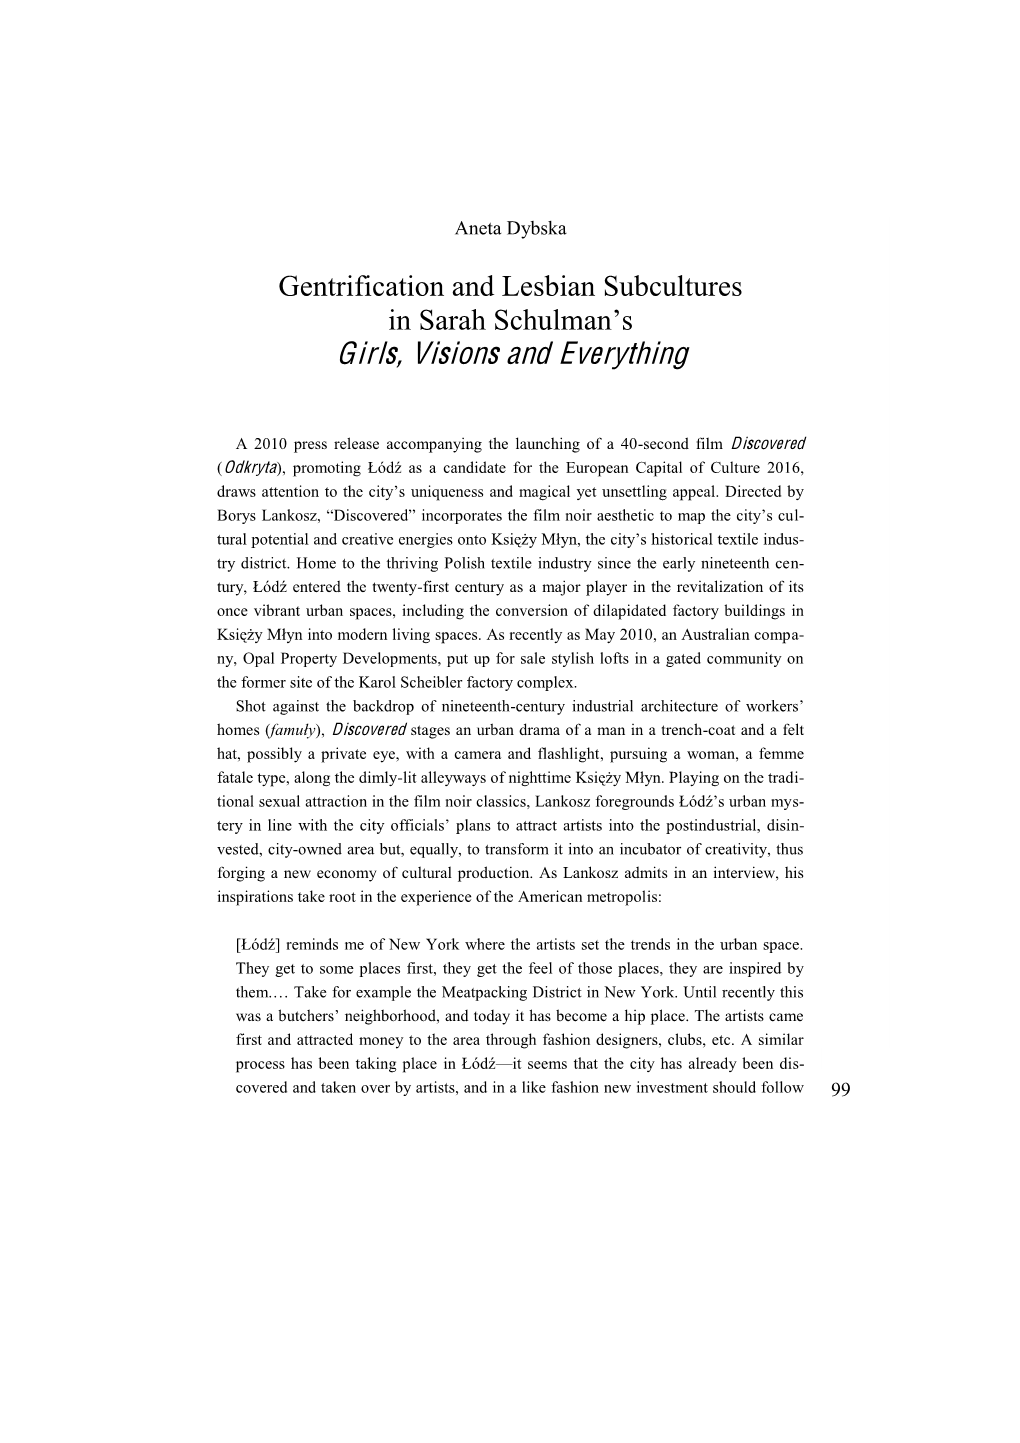 Gentrification and Lesbian Subcultures in Sarah Schulman's